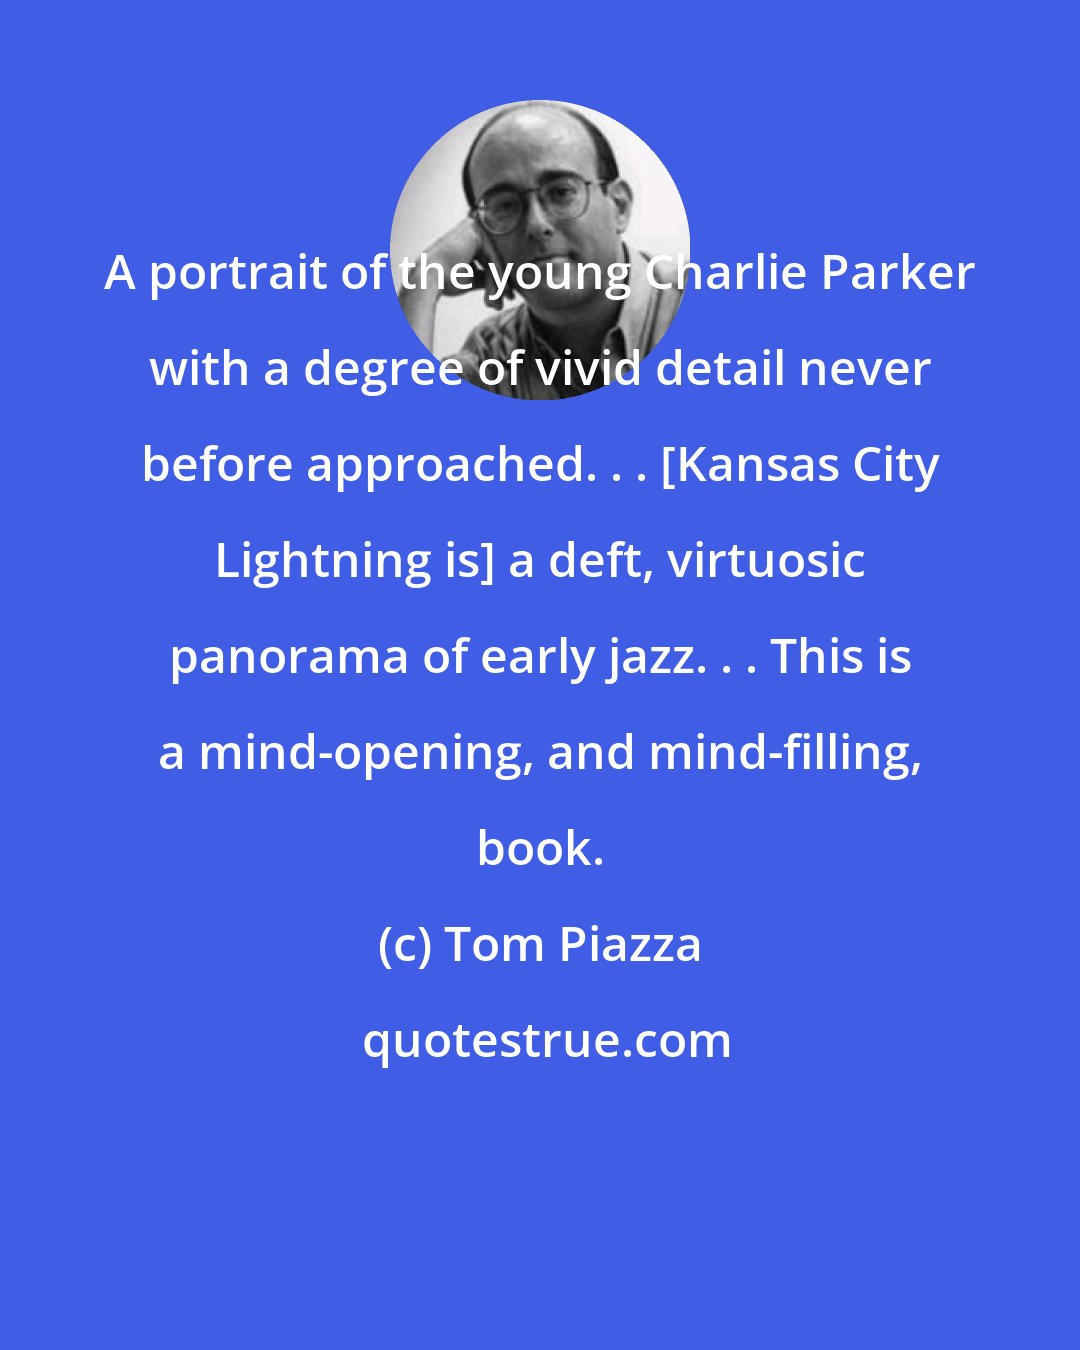 Tom Piazza: A portrait of the young Charlie Parker with a degree of vivid detail never before approached. . . [Kansas City Lightning is] a deft, virtuosic panorama of early jazz. . . This is a mind-opening, and mind-filling, book.